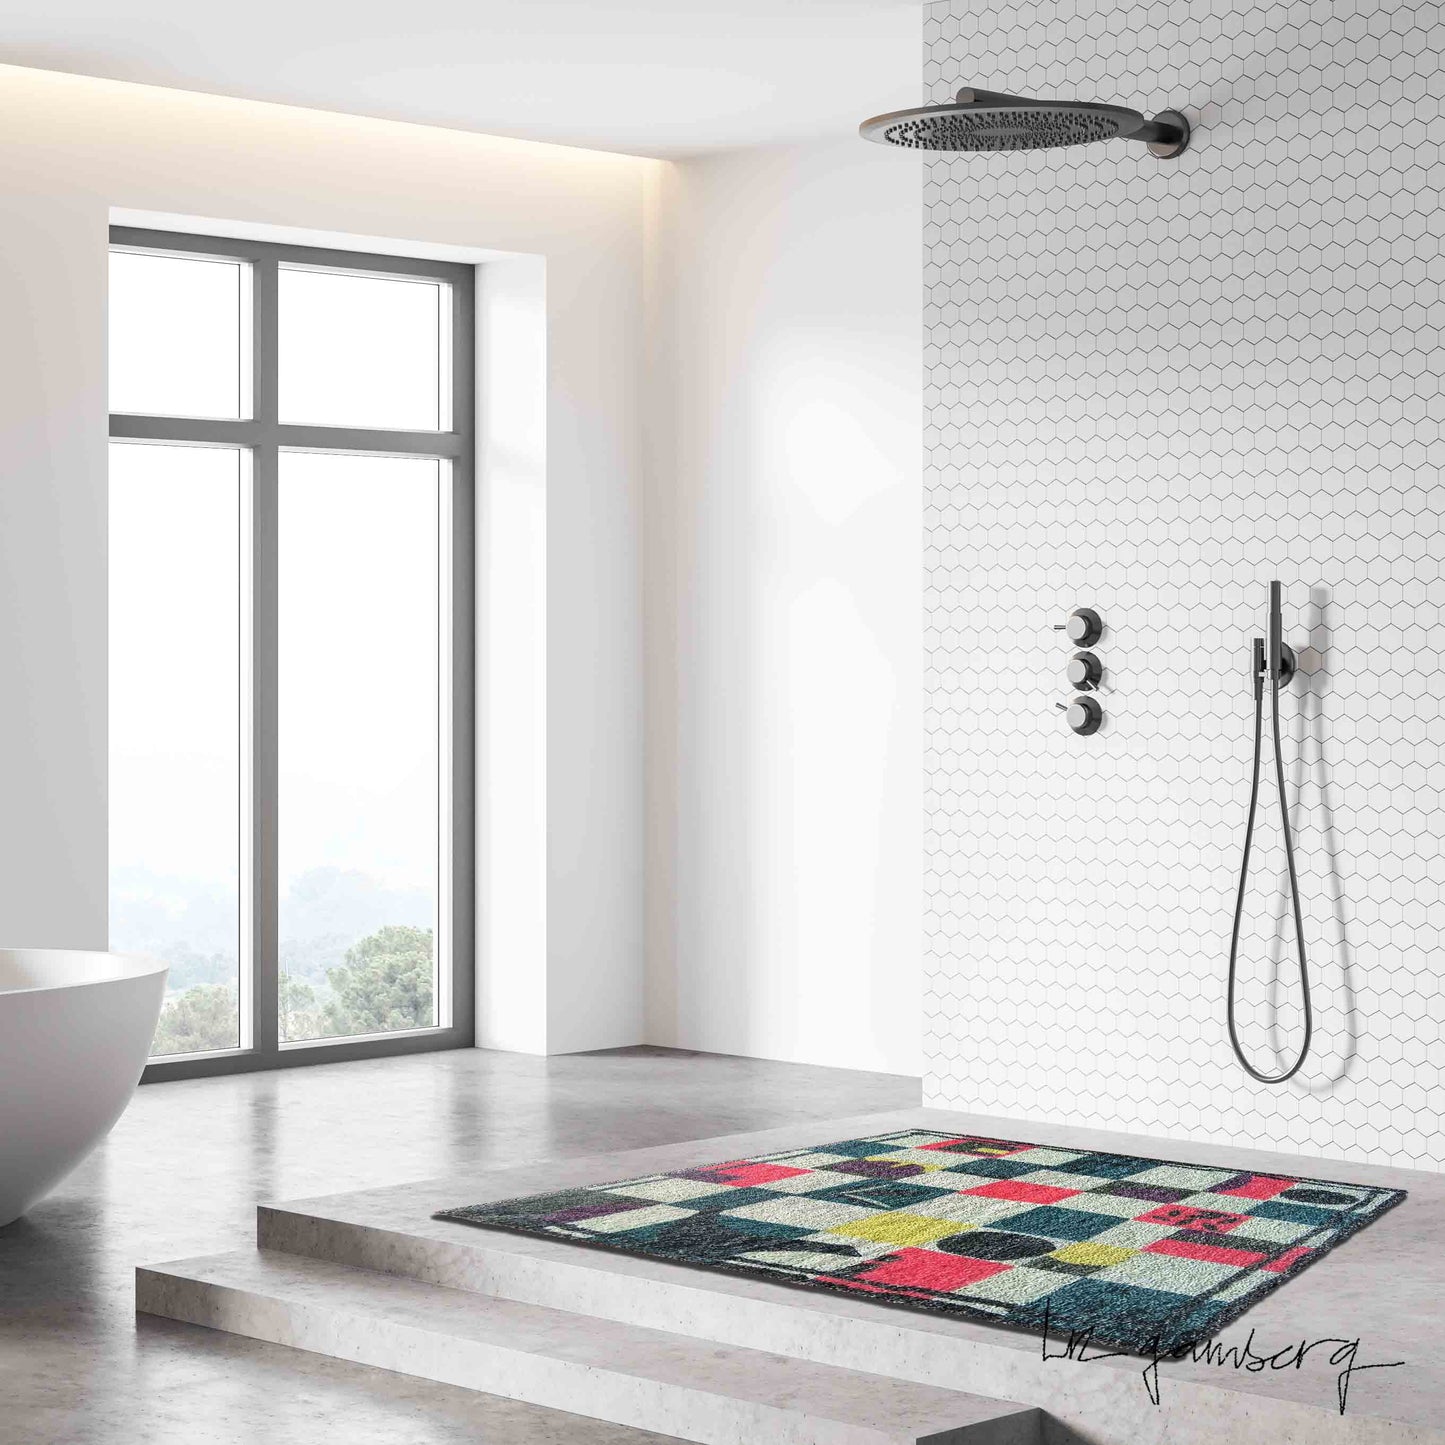 Square Collage Bath Tub Mat by Liz Gamberg Studio from US